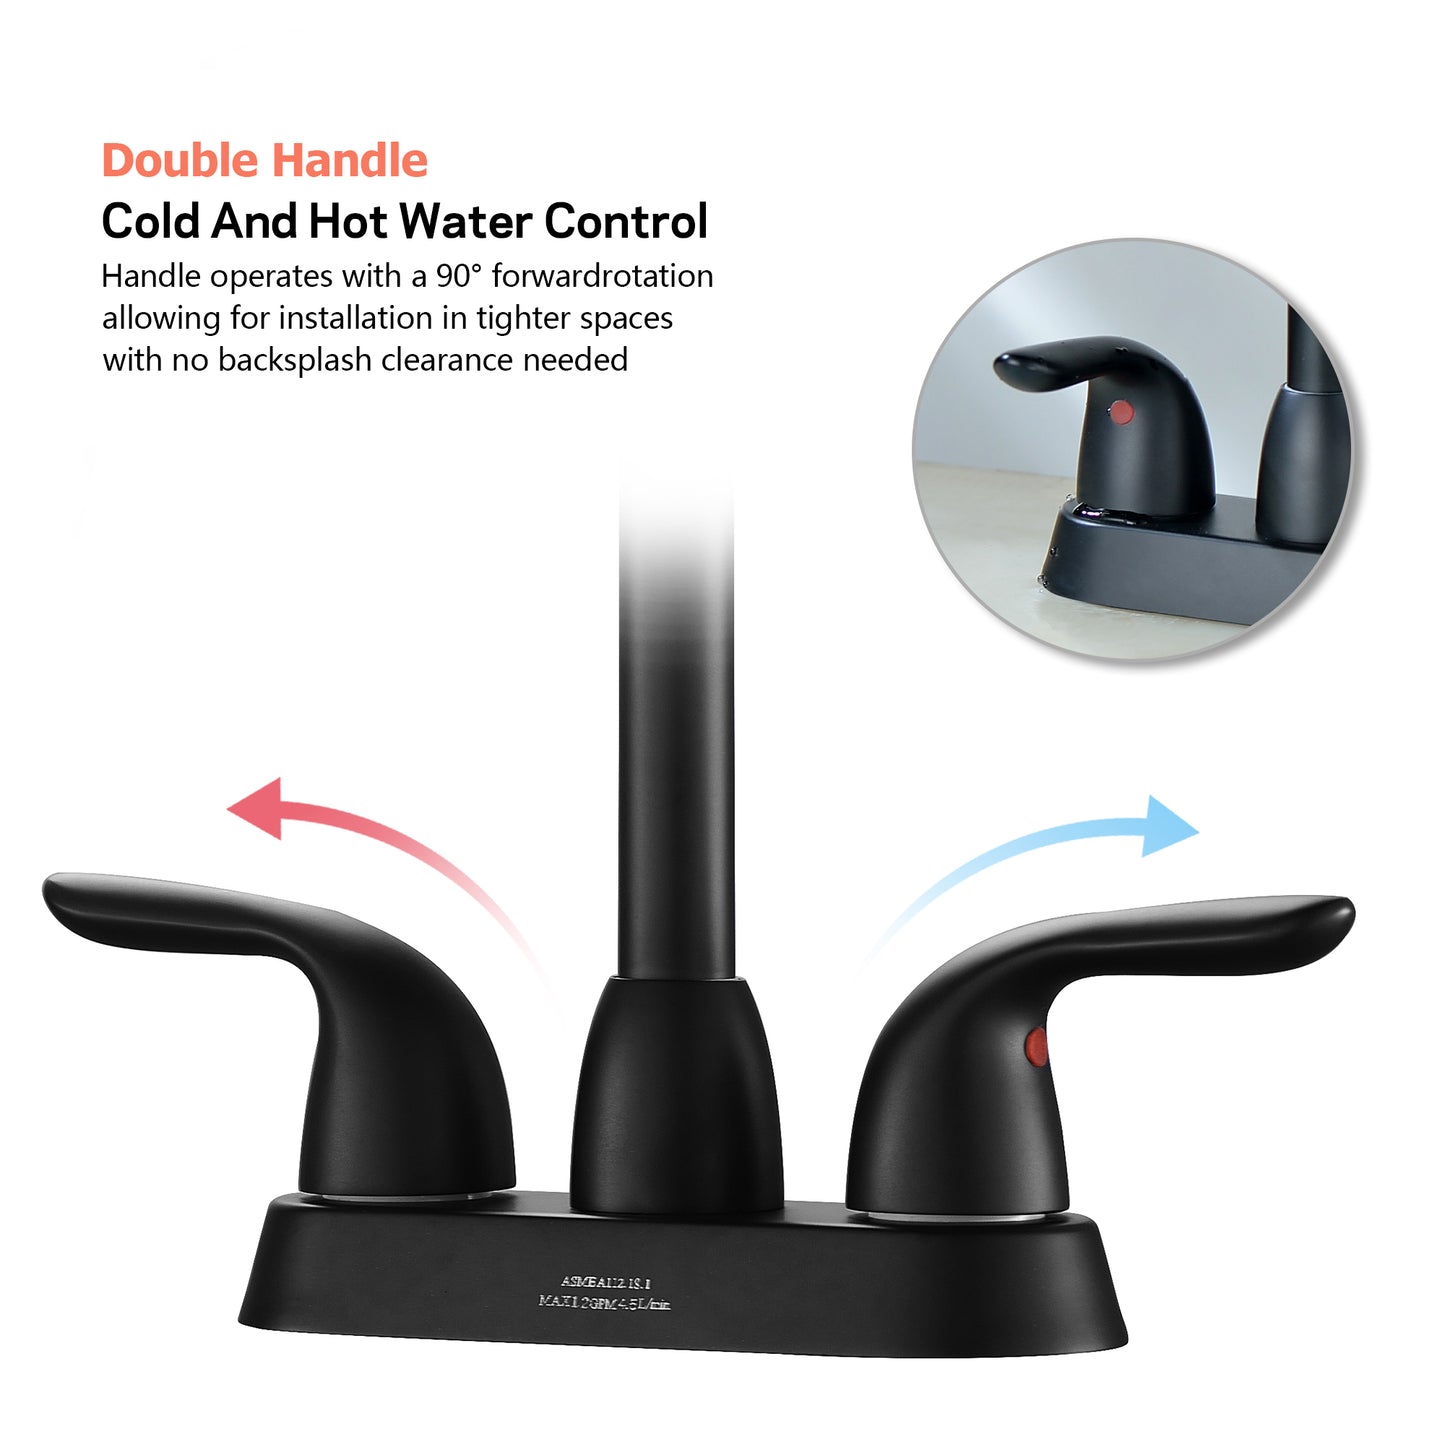 Matte Black 4 Inch Bathroom Faucet with 2 Handles and Pop-Up Drain